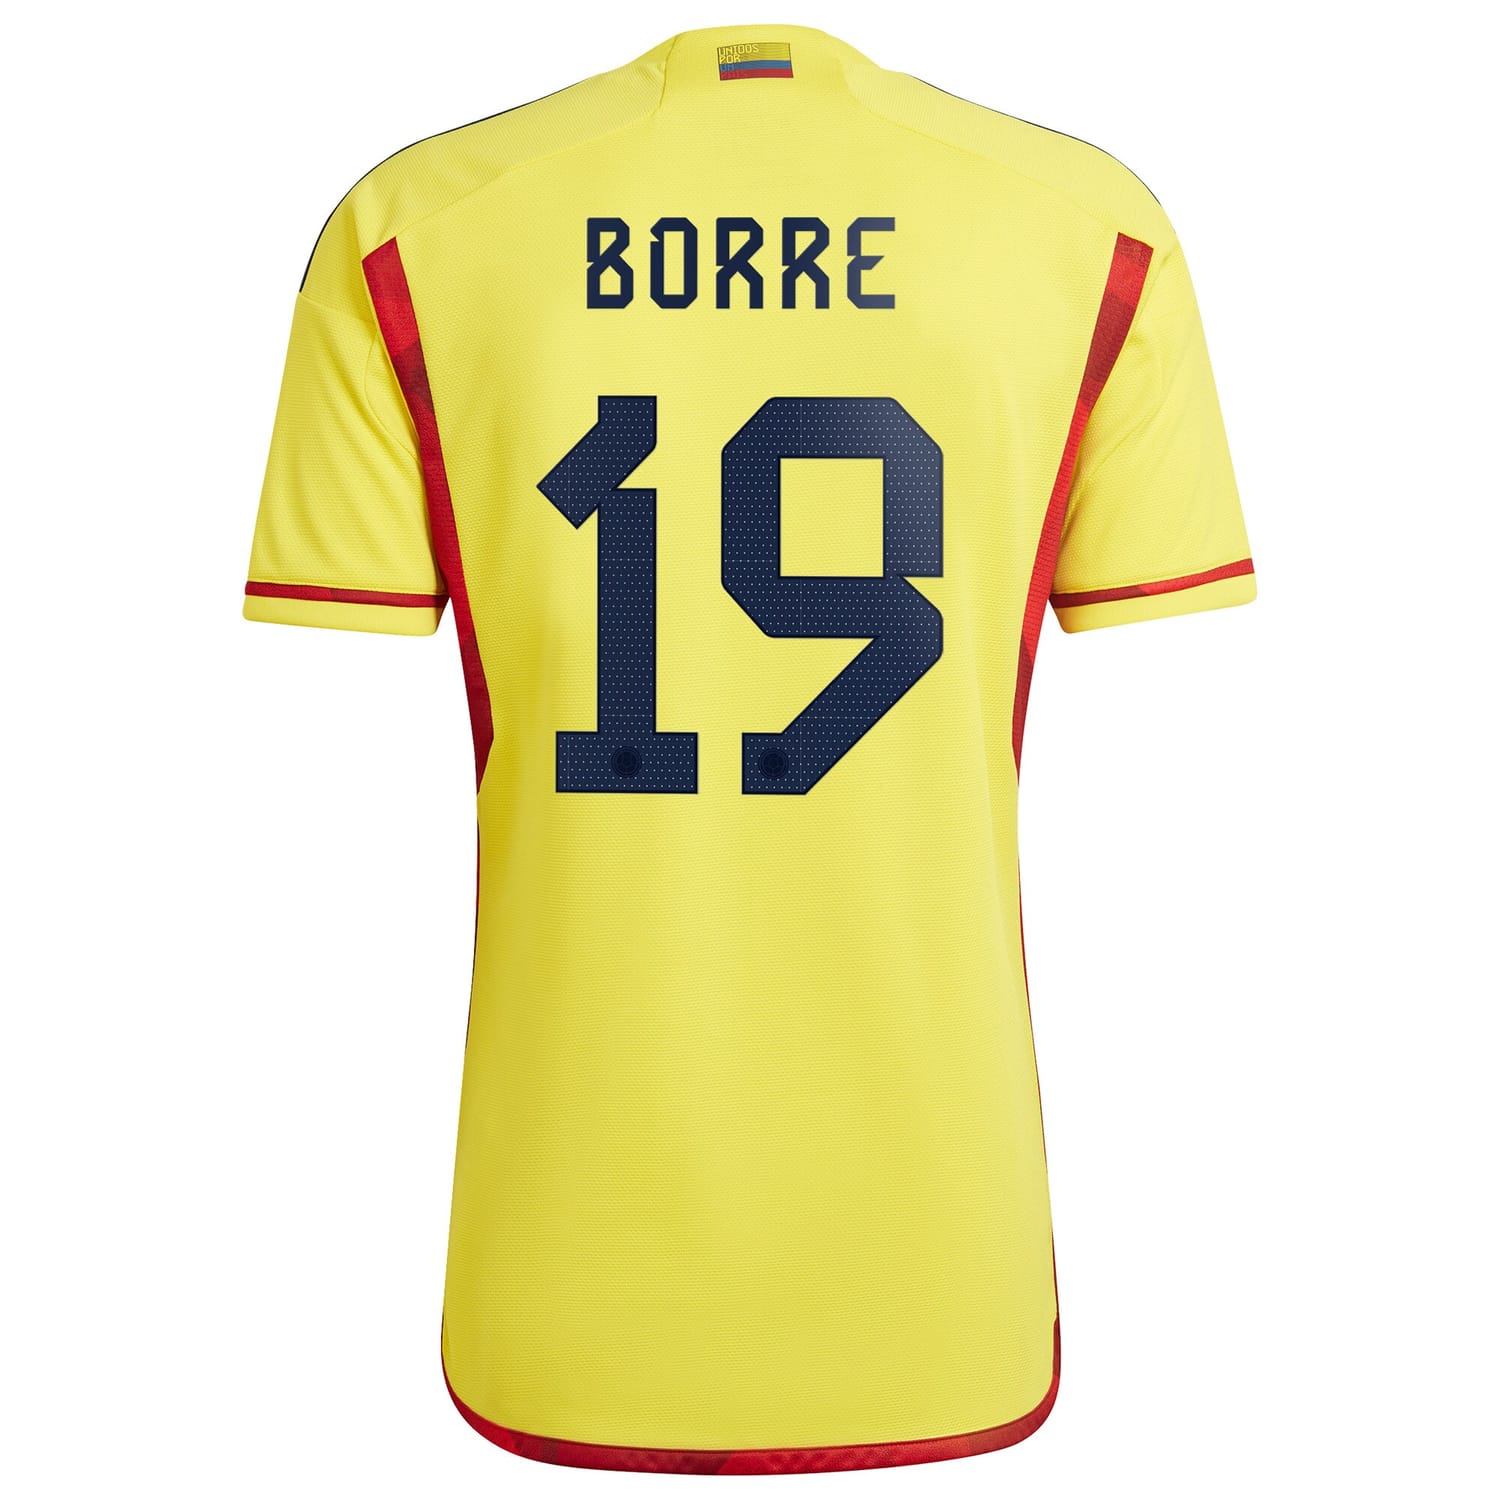 Colombia National Team Home Jersey Shirt Yellow 2022-23 player Rafael Borré printing for Men